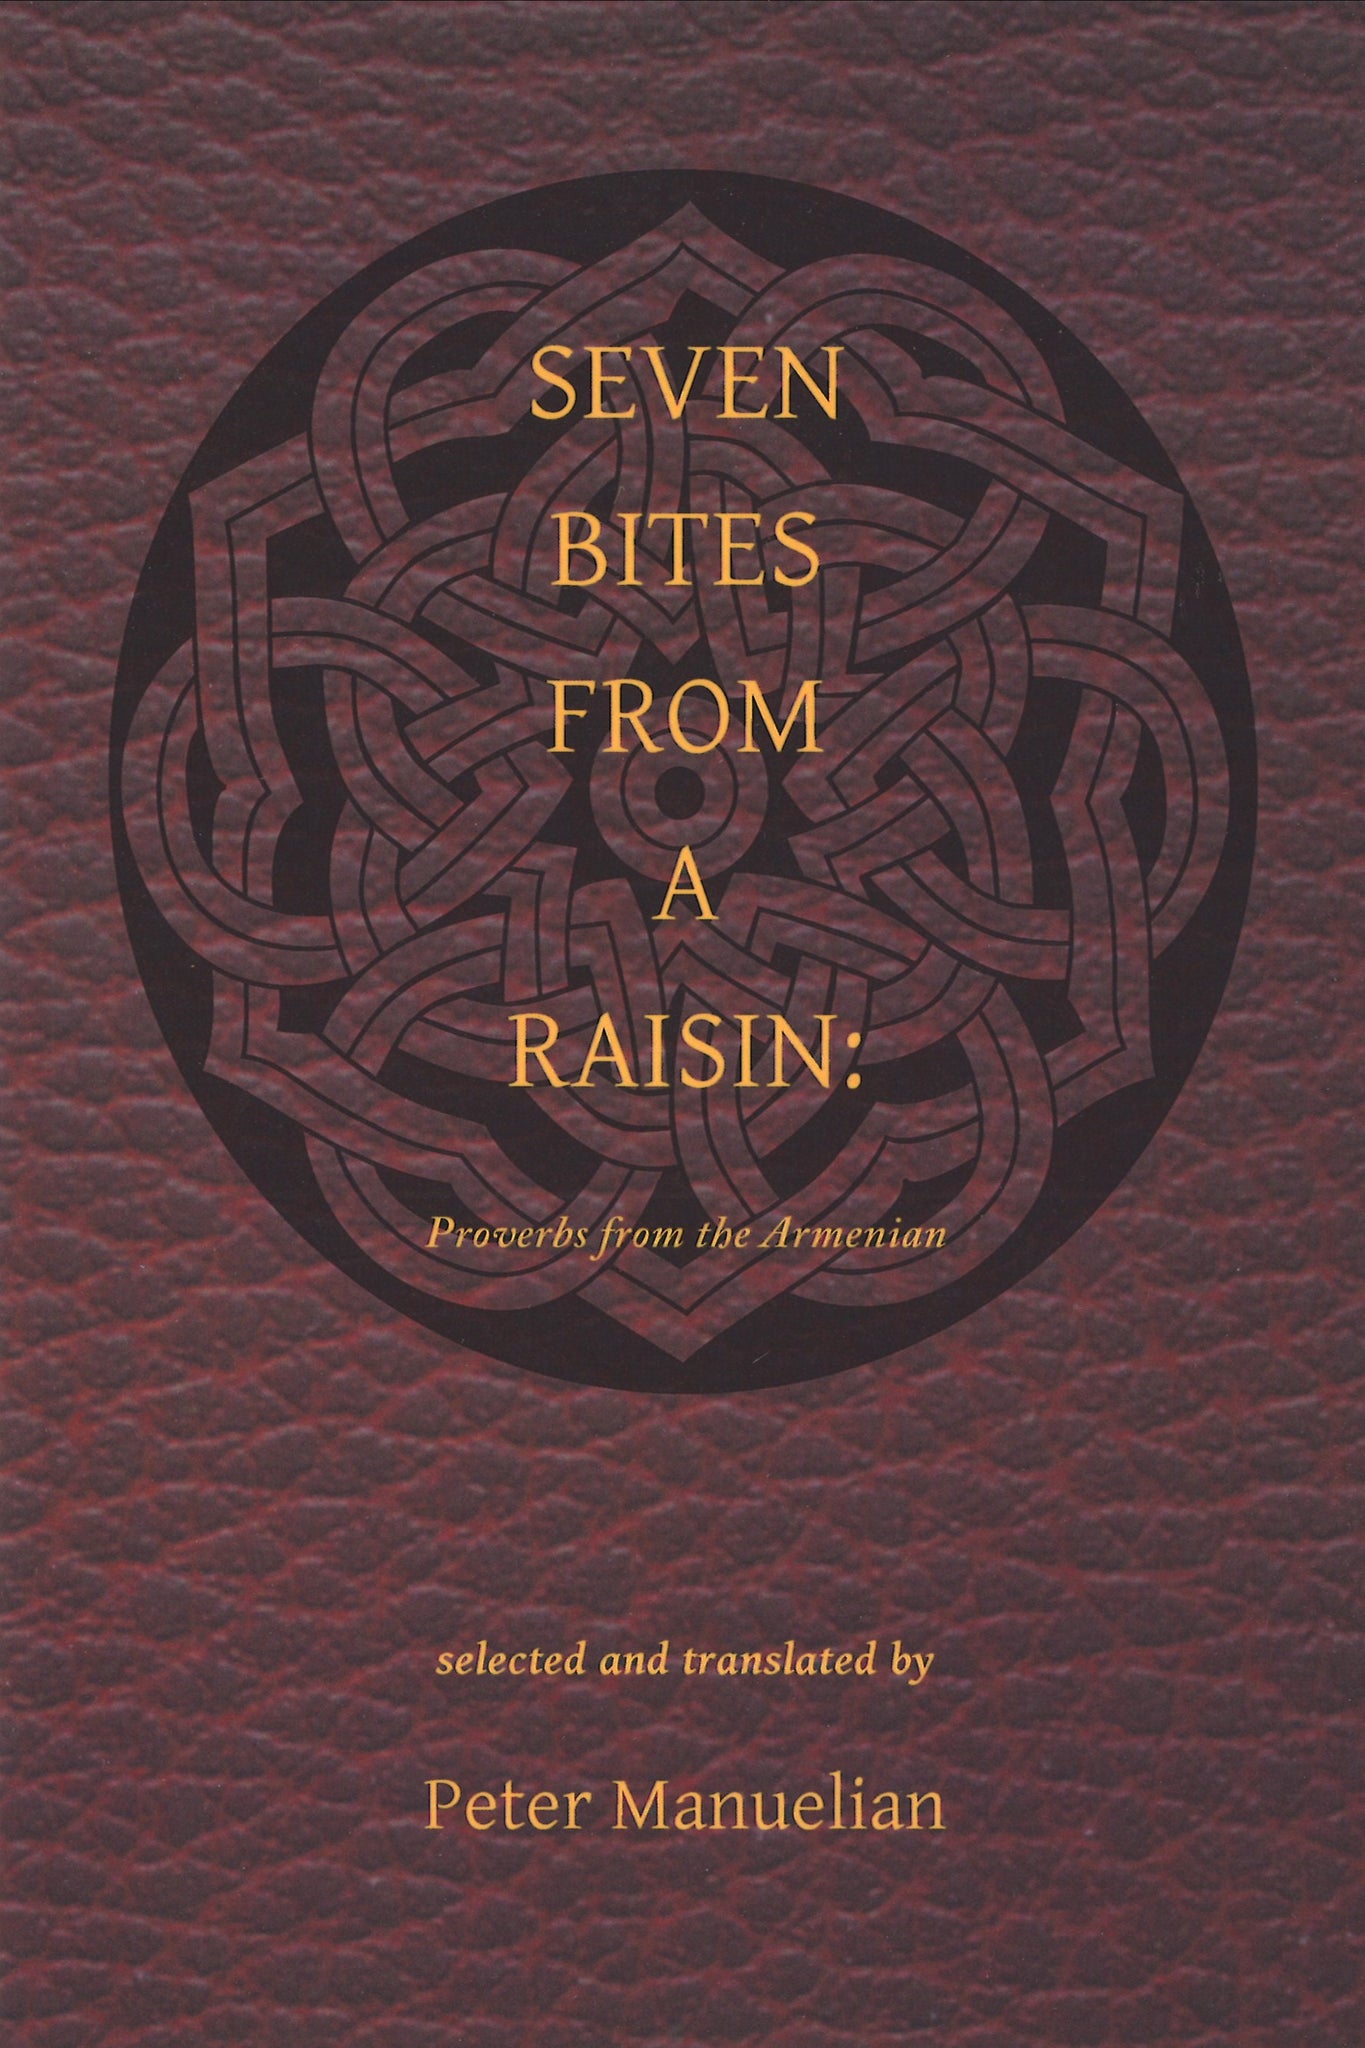 SEVEN BITES FROM A RAISIN: Proverbs from the Armenian